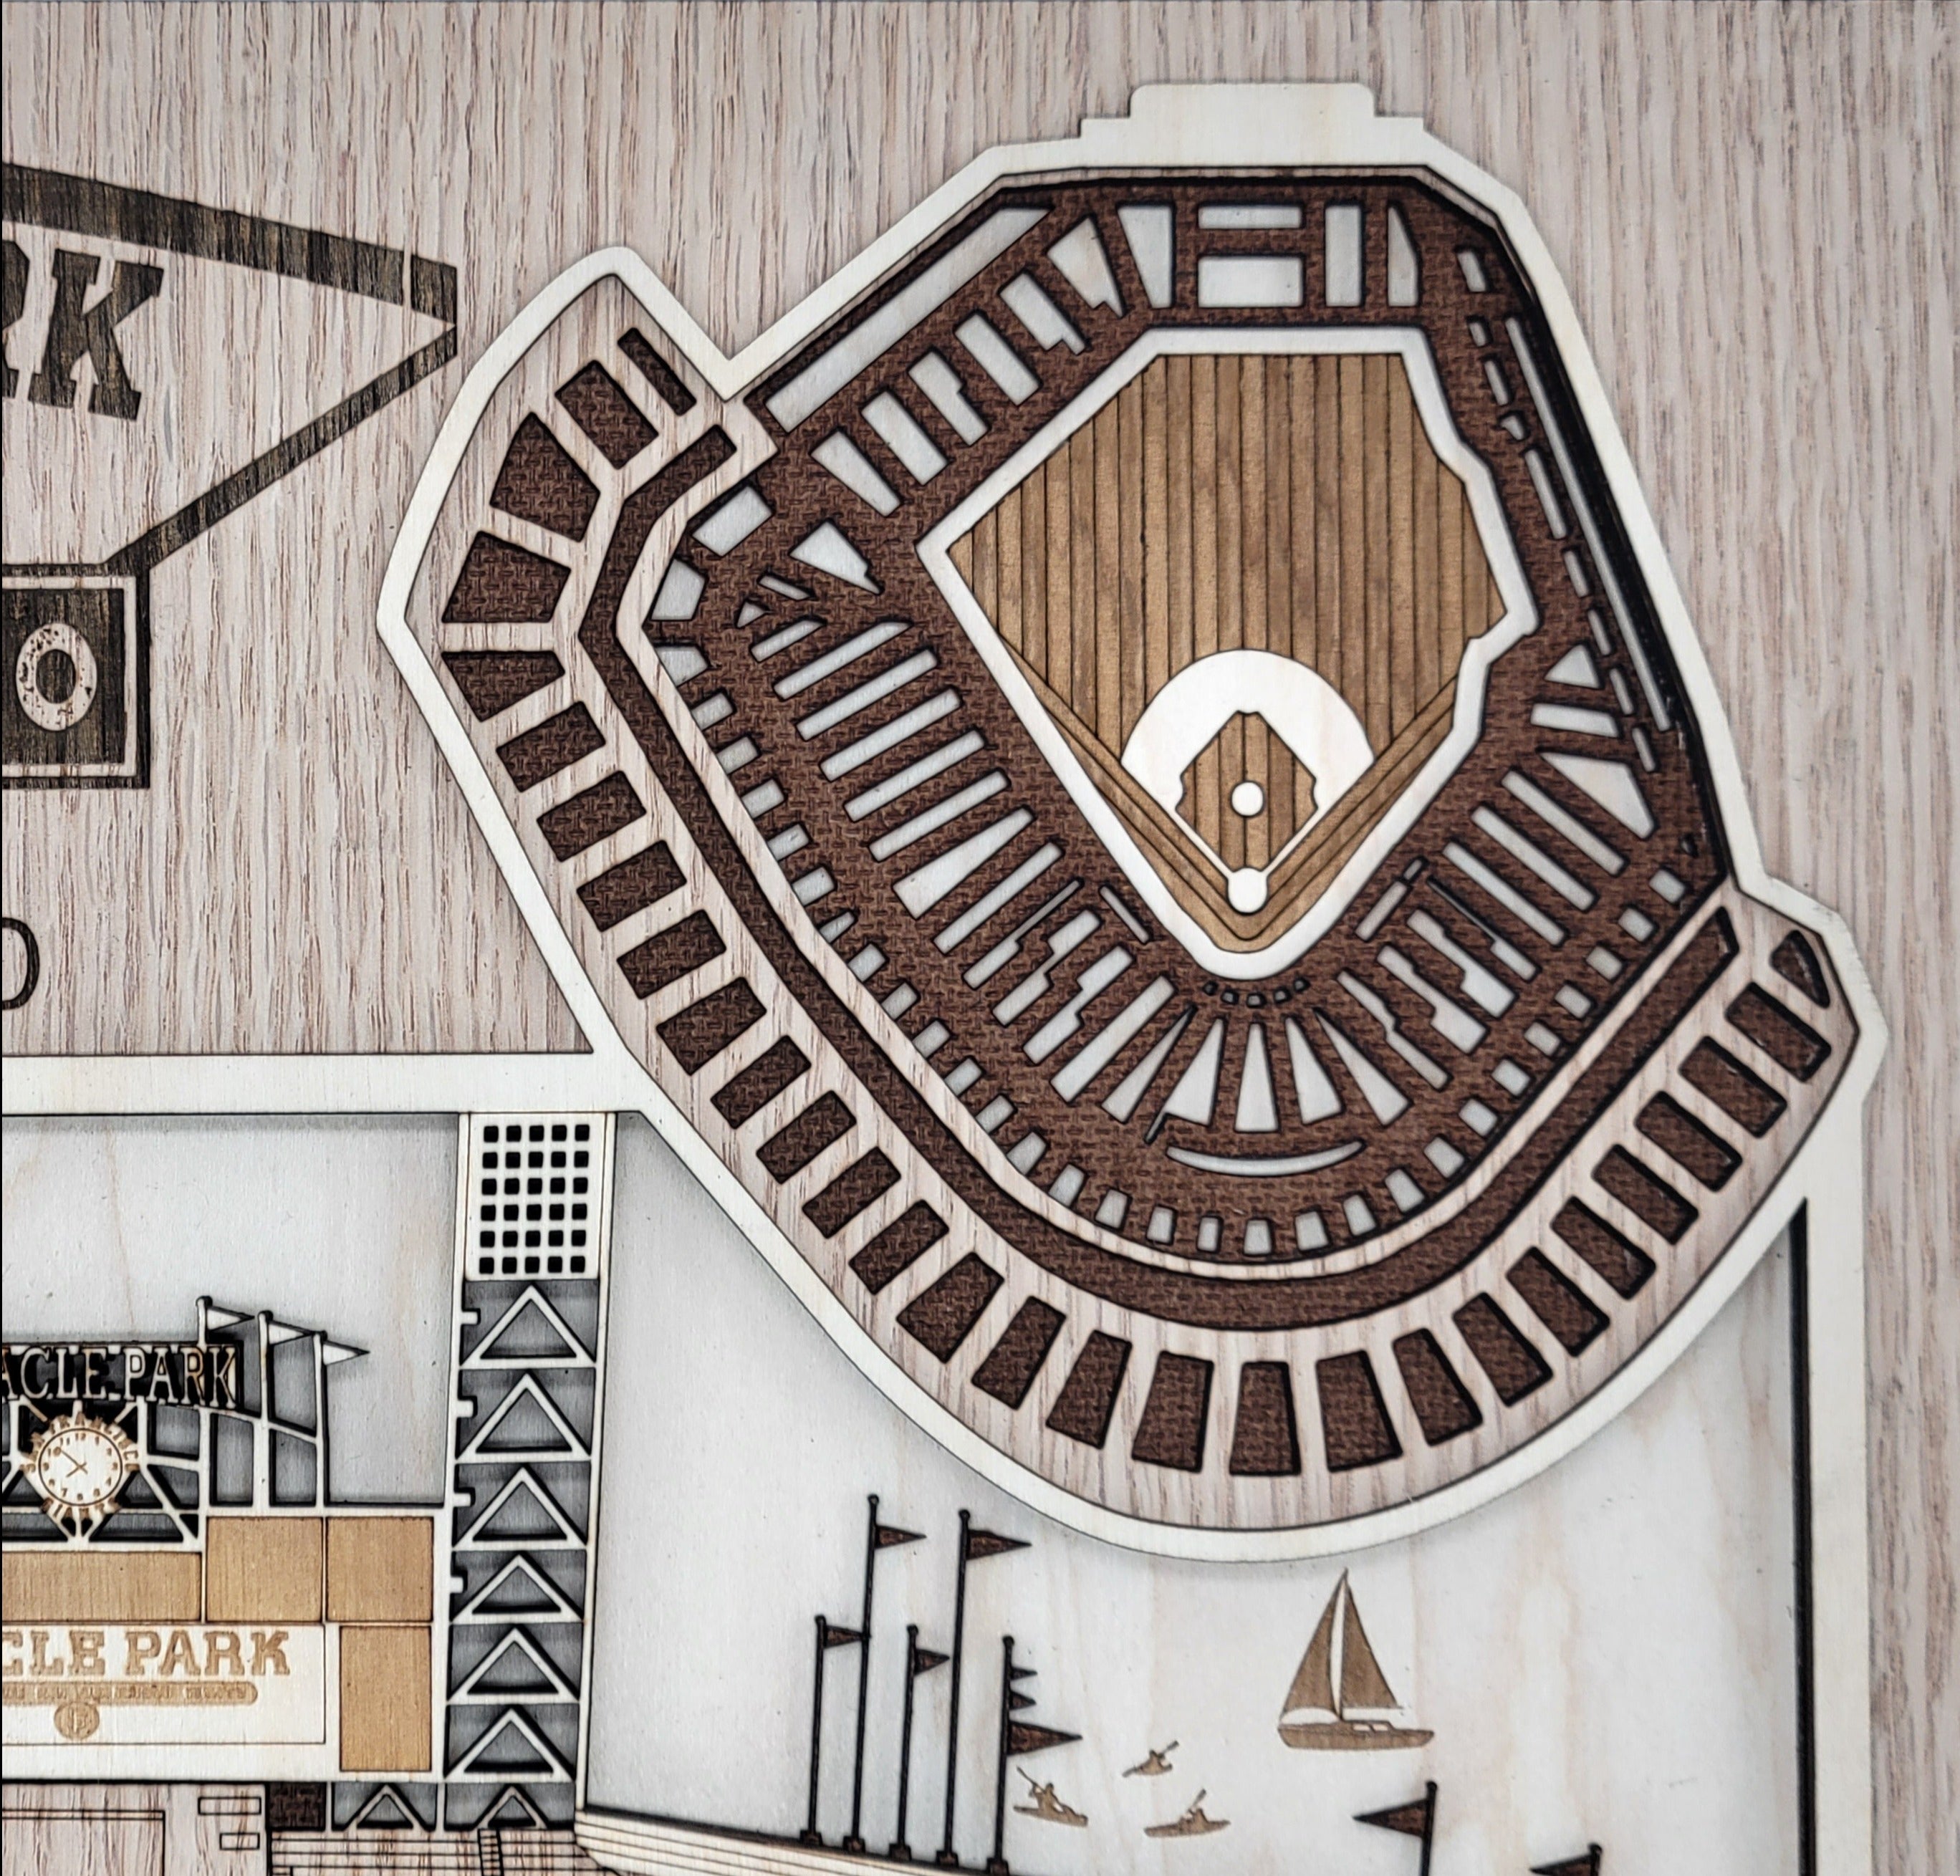 Oracle Park - Home of the San Francisco Giants - Layered Wooden Ballpark with San Francisco Skyline